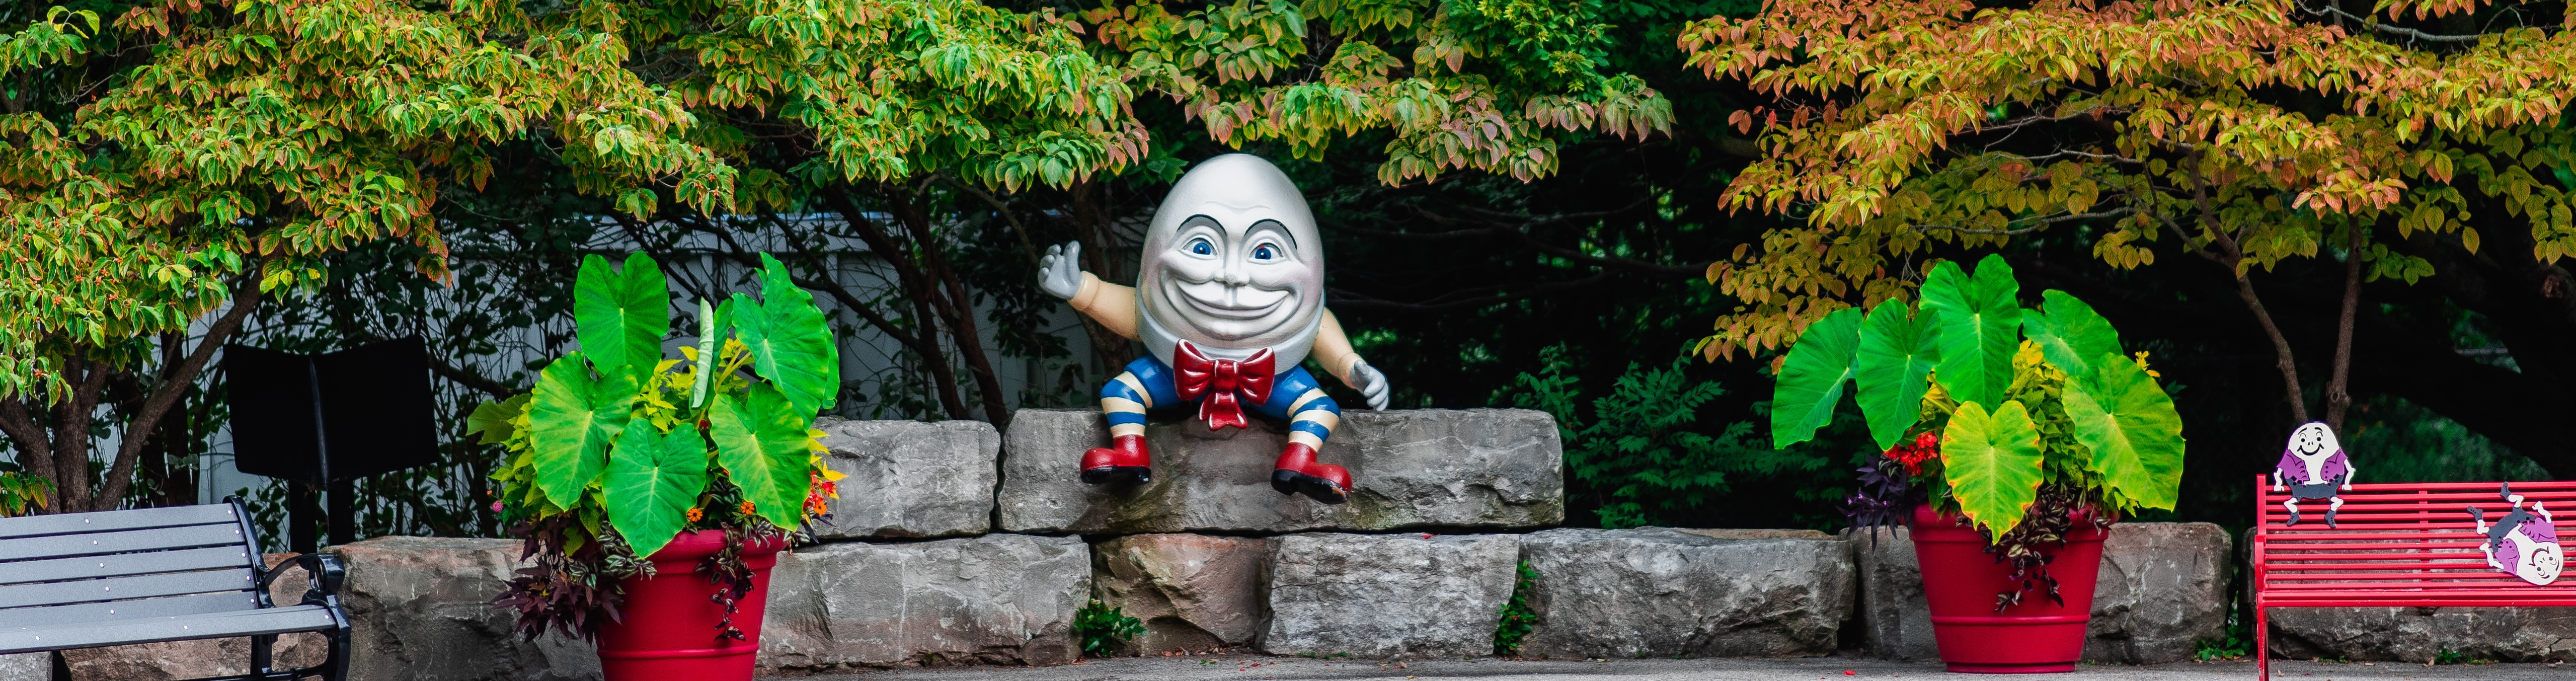 Photo of Humpty Dumpty statue at Storybook Gardens